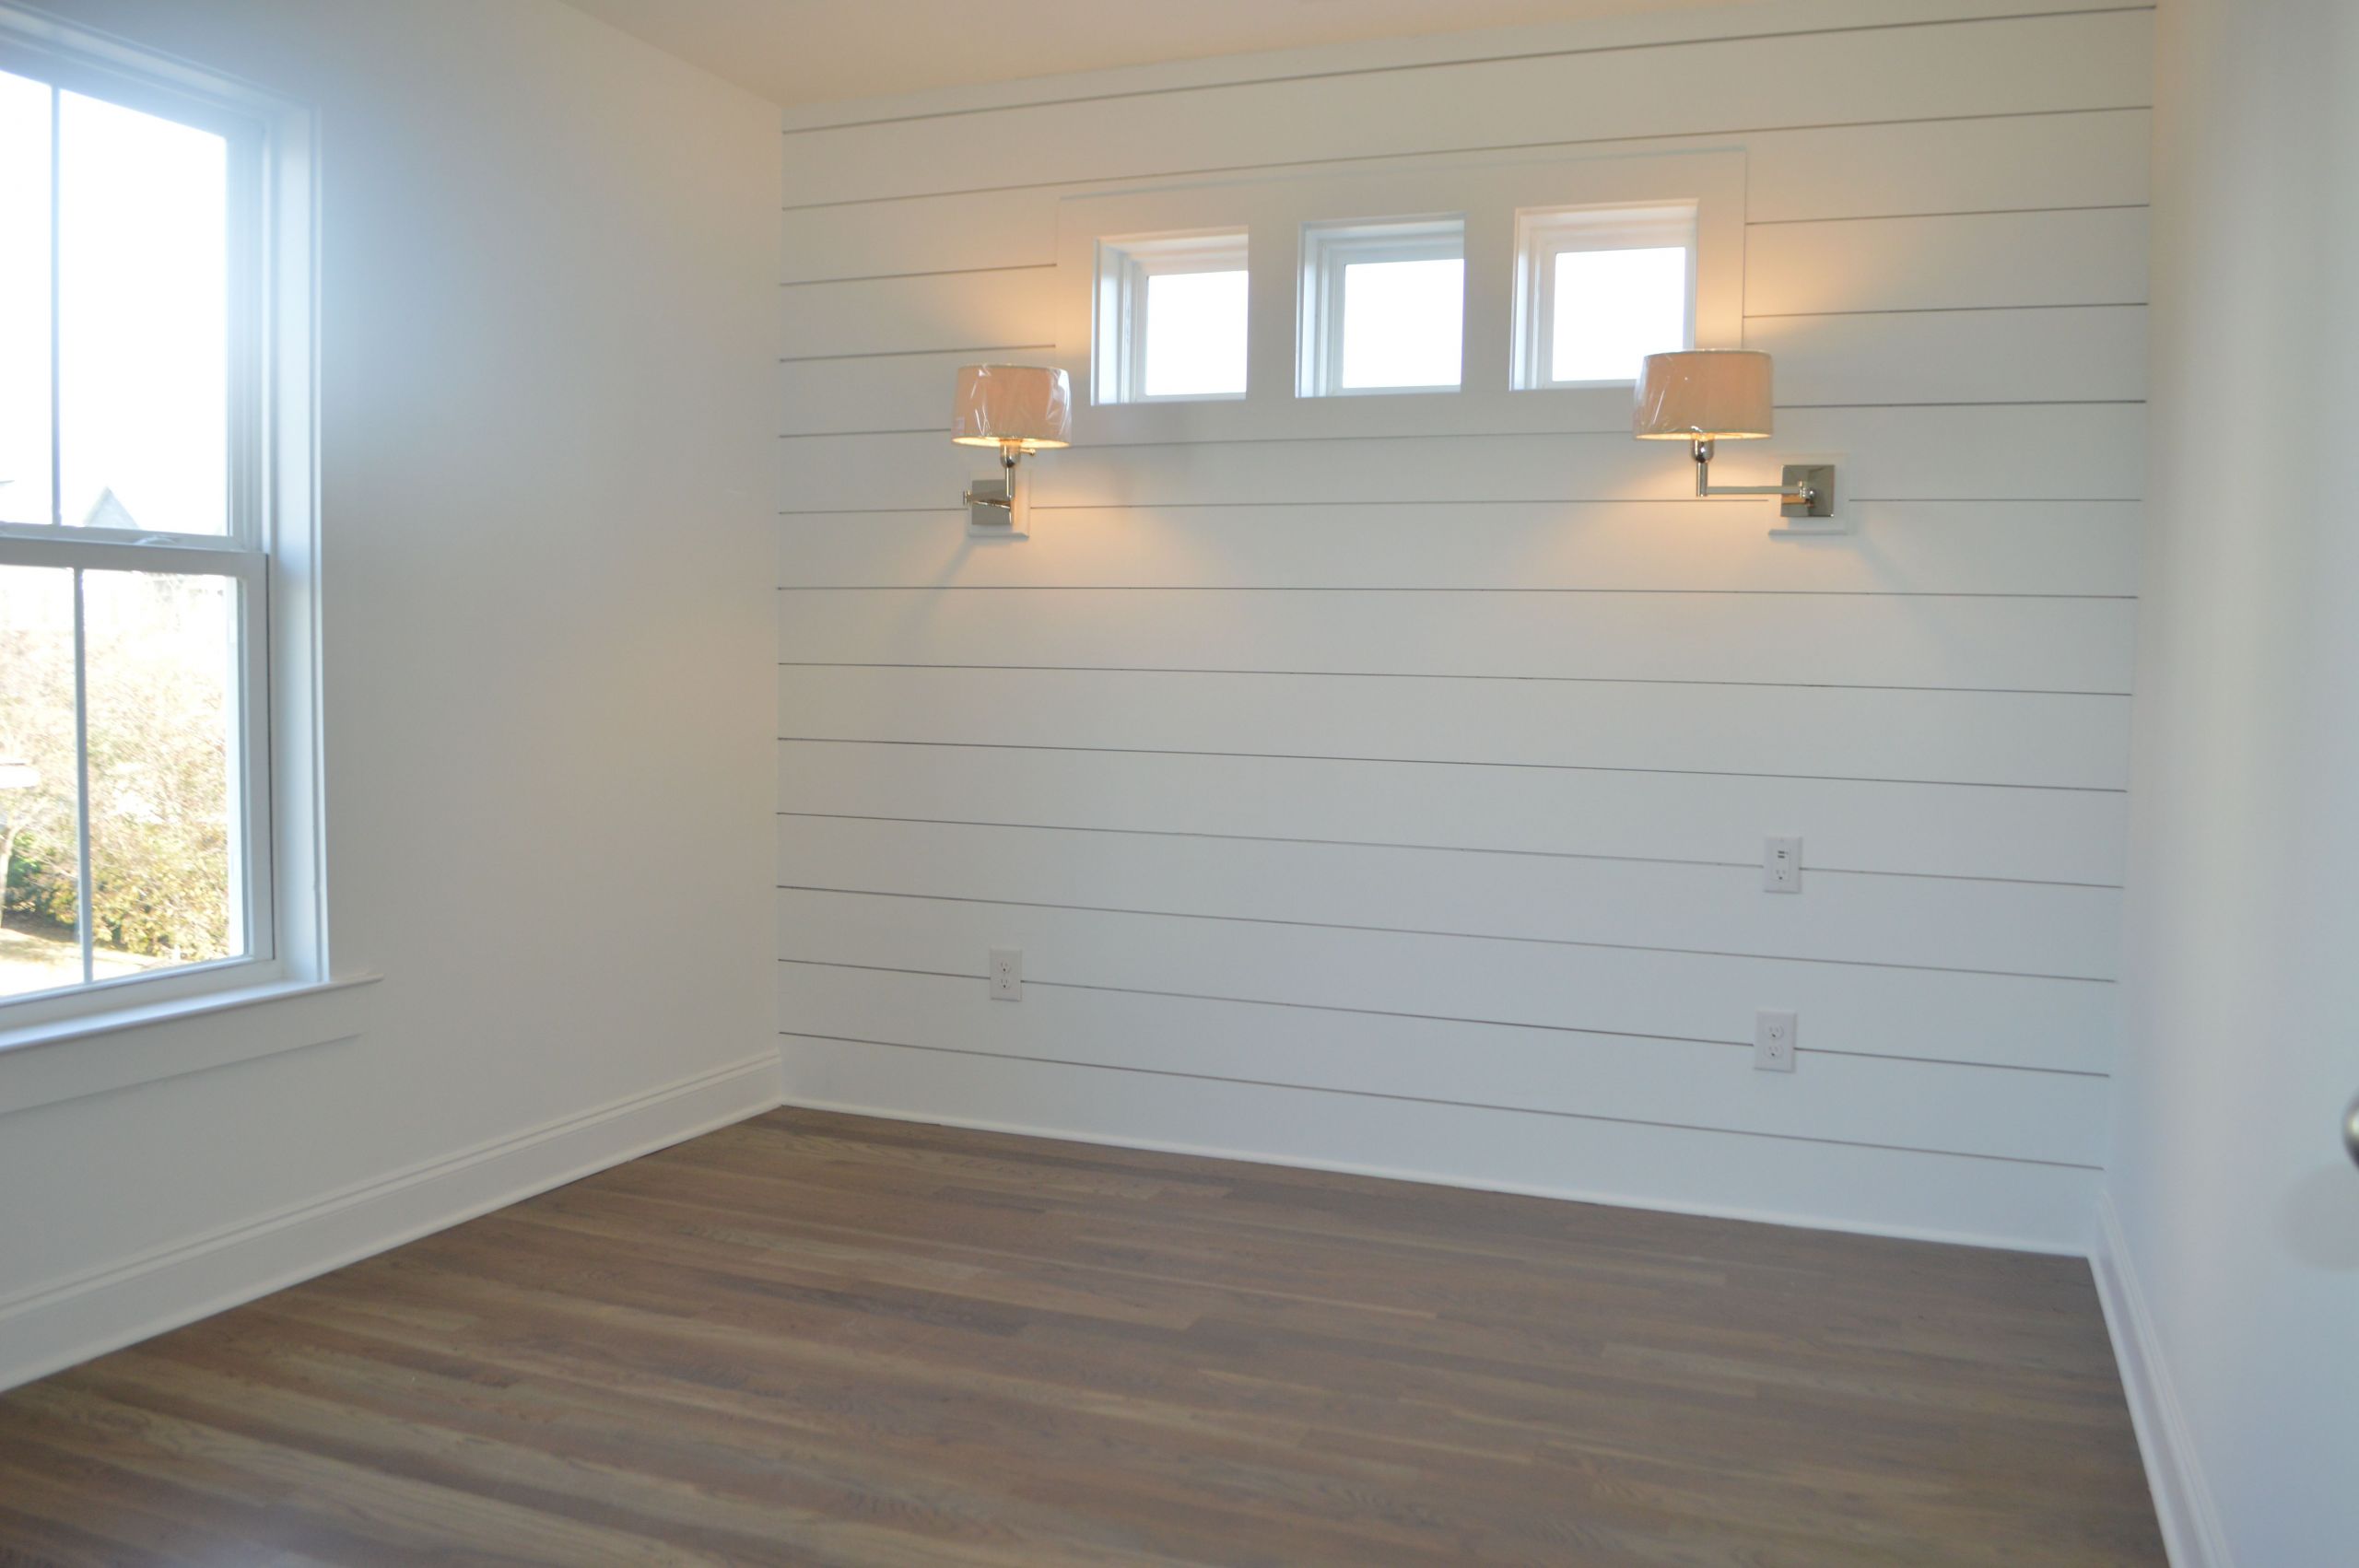 Shiplap Accent Wall Bedroom
 Shiplap Accent Wall Finn s room Love the windows